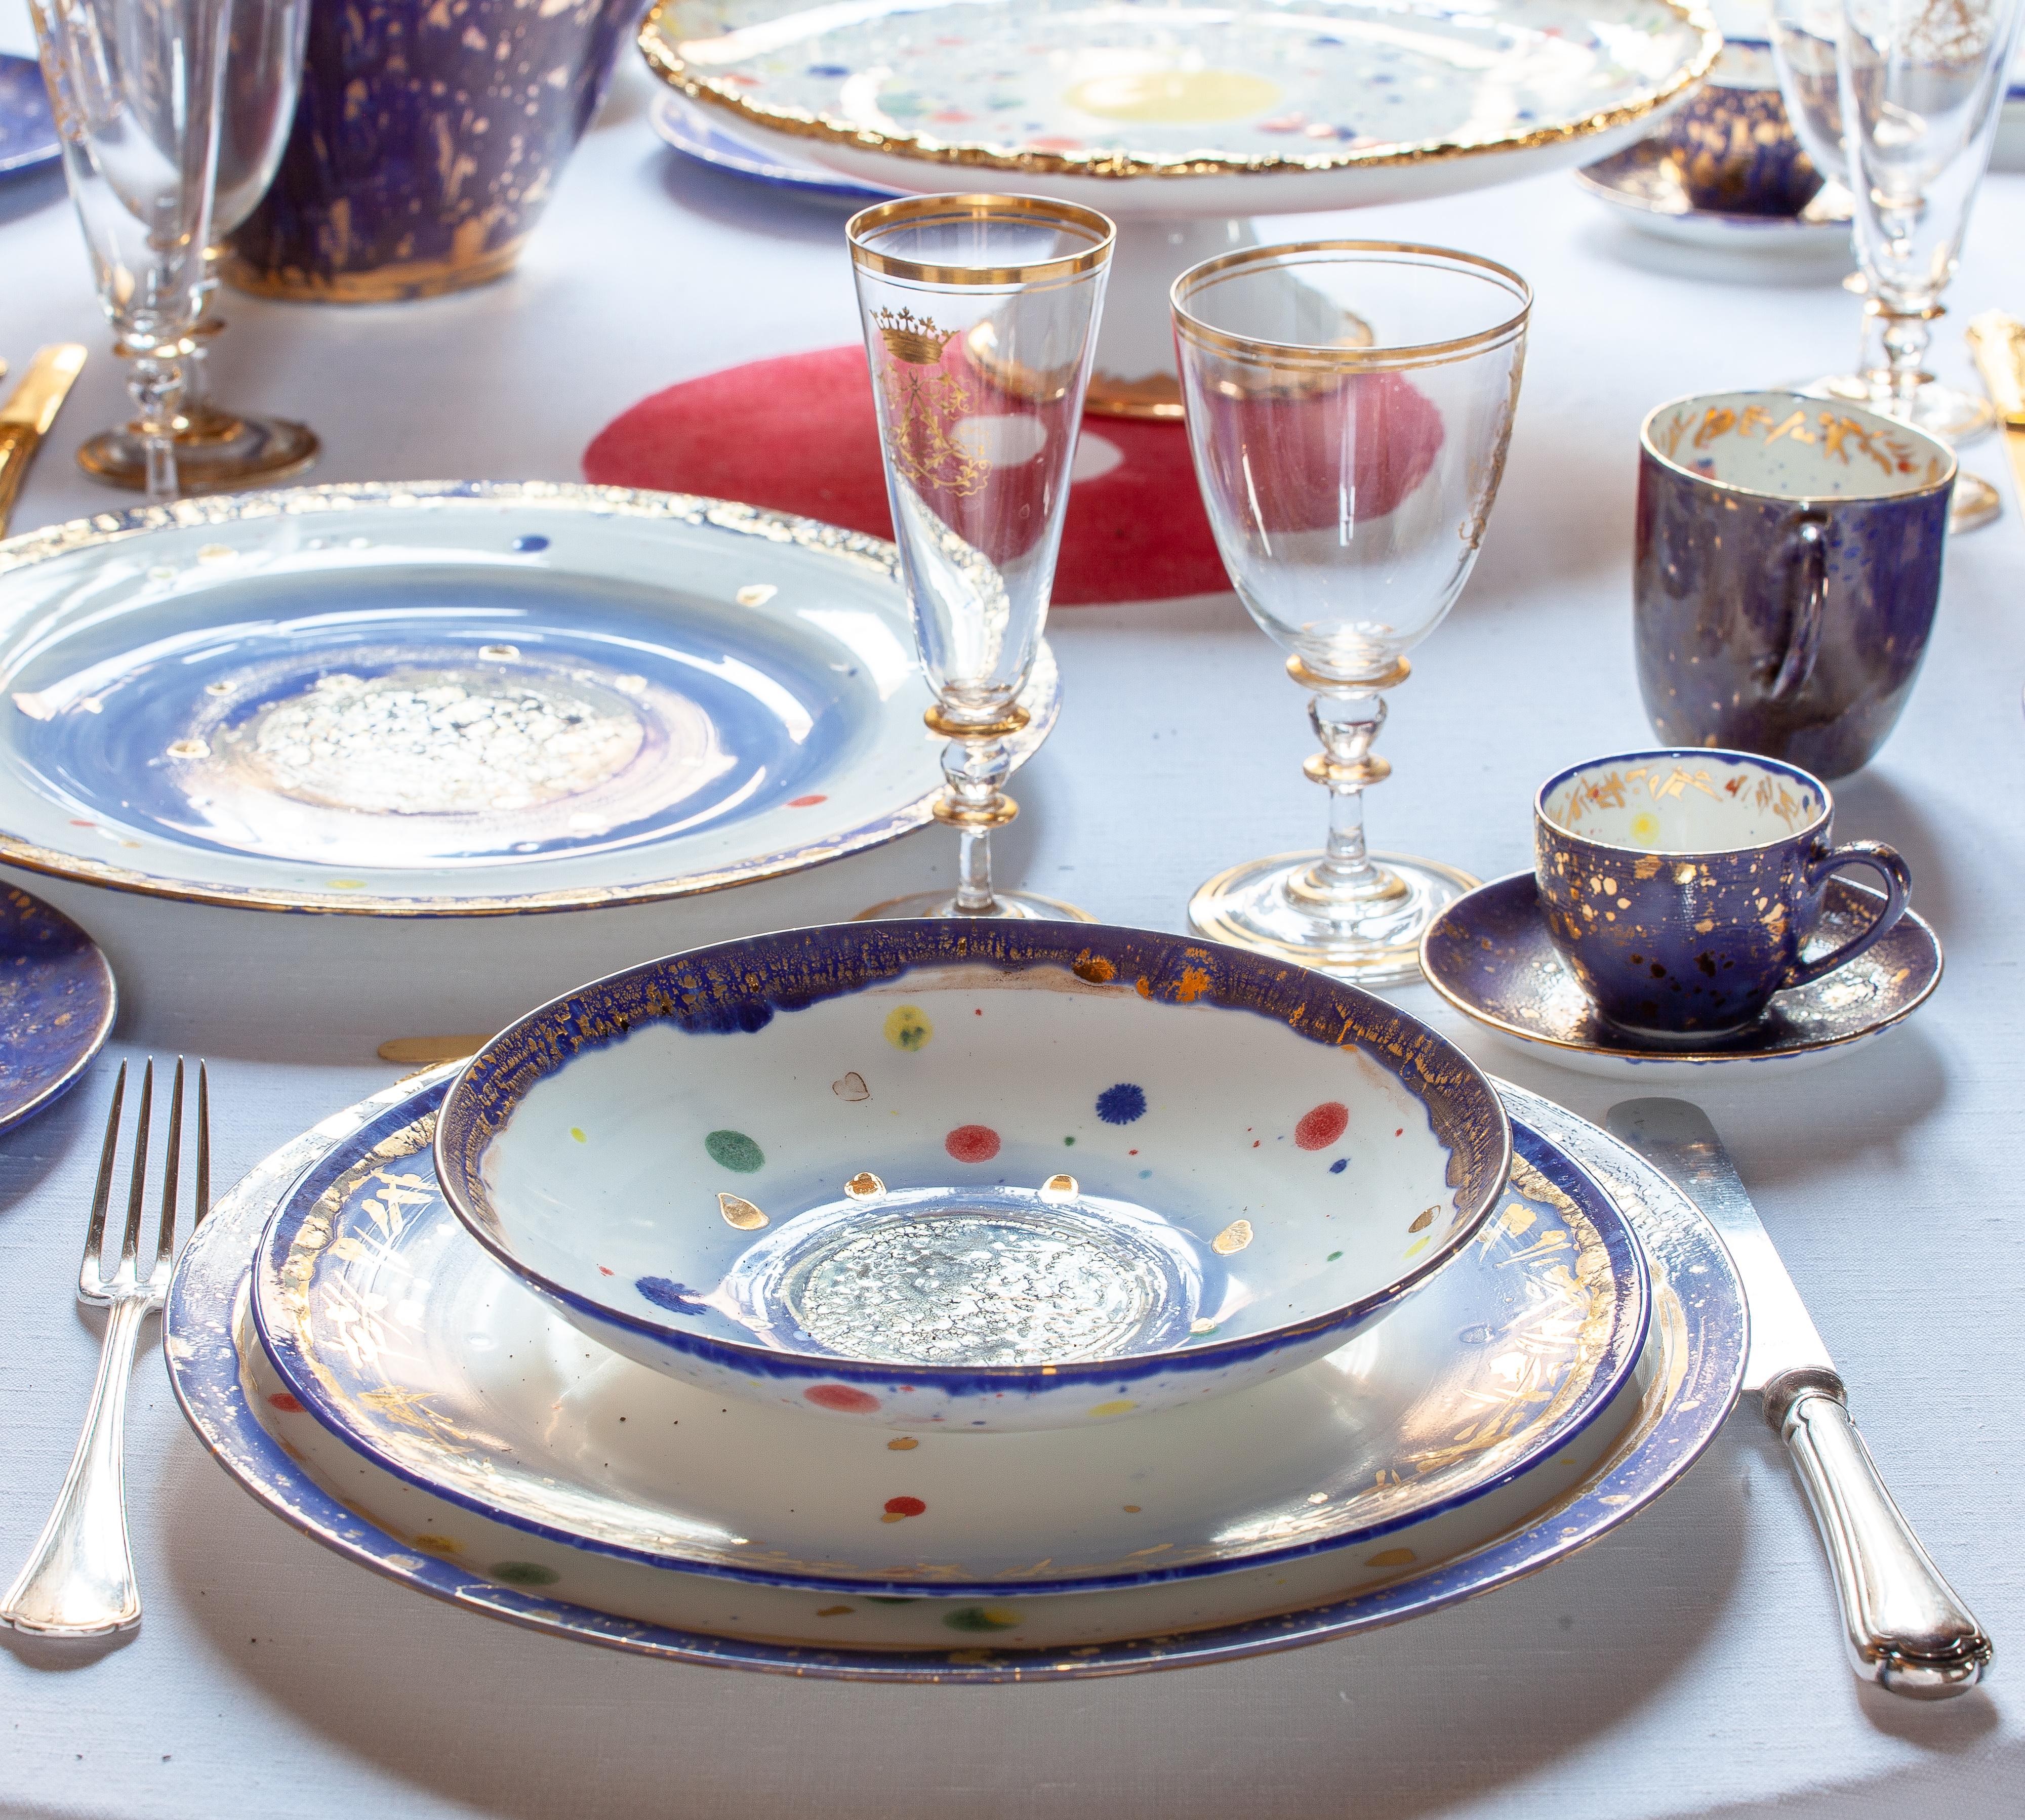 Handcrafted in Italy from the finest porcelain, this Apollo Bianco Platter leads us into a magic world. Shades of blue lapis lazuli evoke the magic of oriental novellas. A fairytale is revealed by playful nuggets of gold, green red and blue drifting